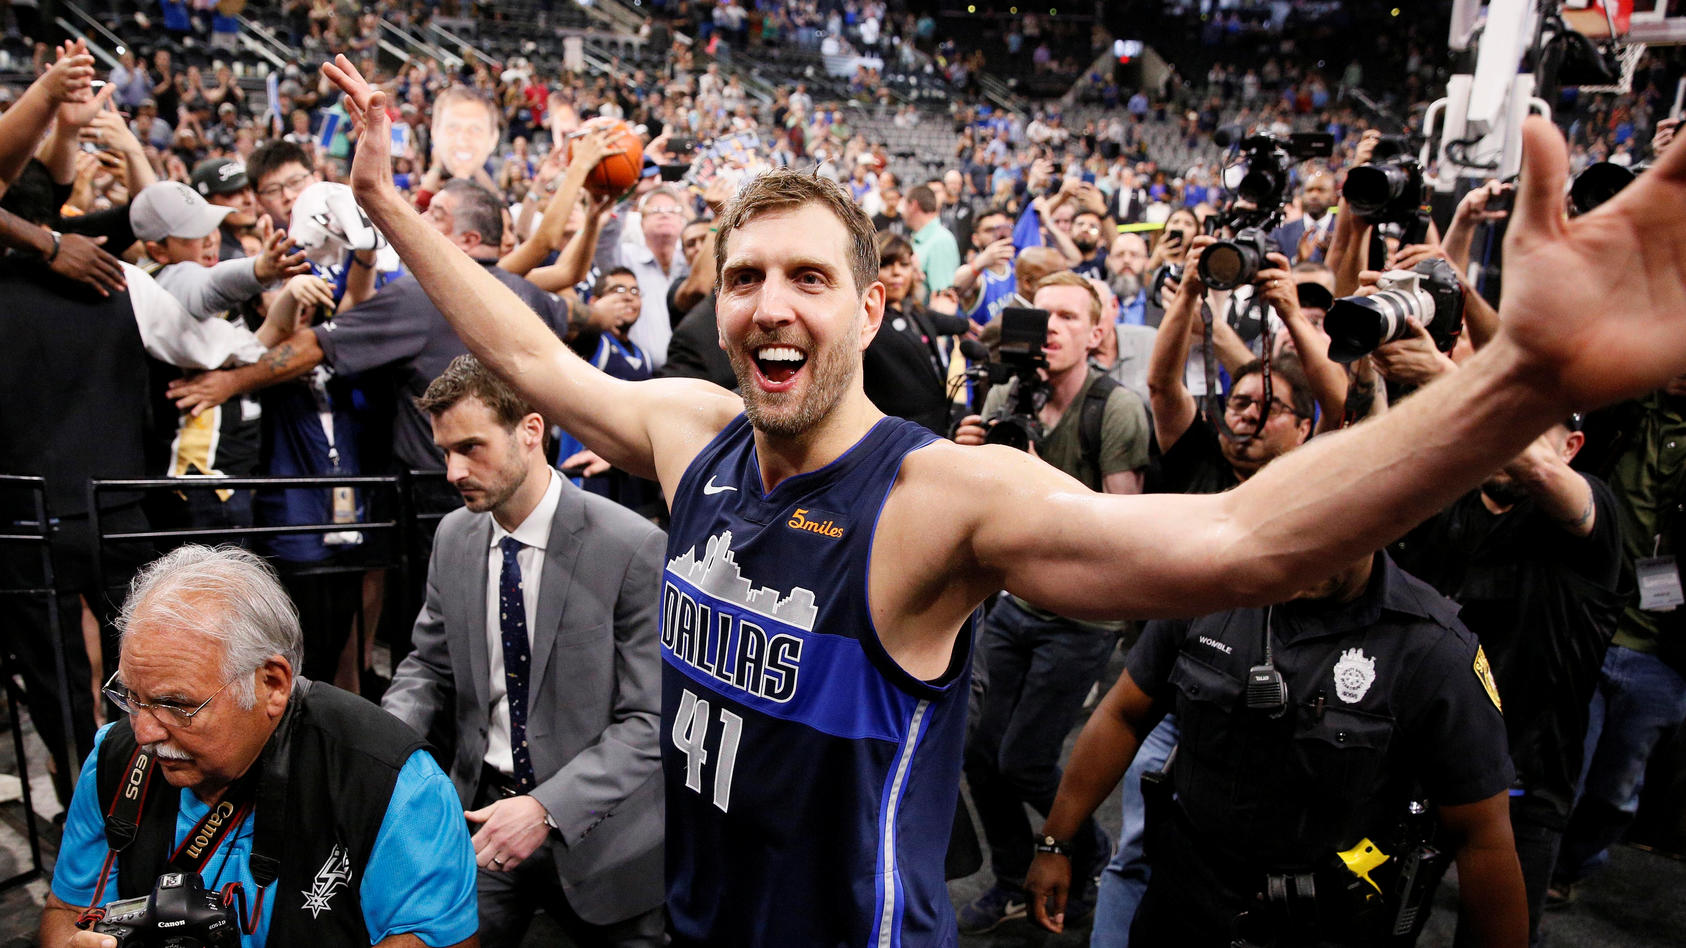 FILE PHOTO: Apr 10, 2019; San Antonio, TX, USA; Dallas Mavericks power forward Dirk Nowitzki (41) high fives the fans while leaving the court after the game against the San Antonio Spurs at AT&T Center. Mandatory Credit: Soobum Im-USA TODAY Sports/Fi